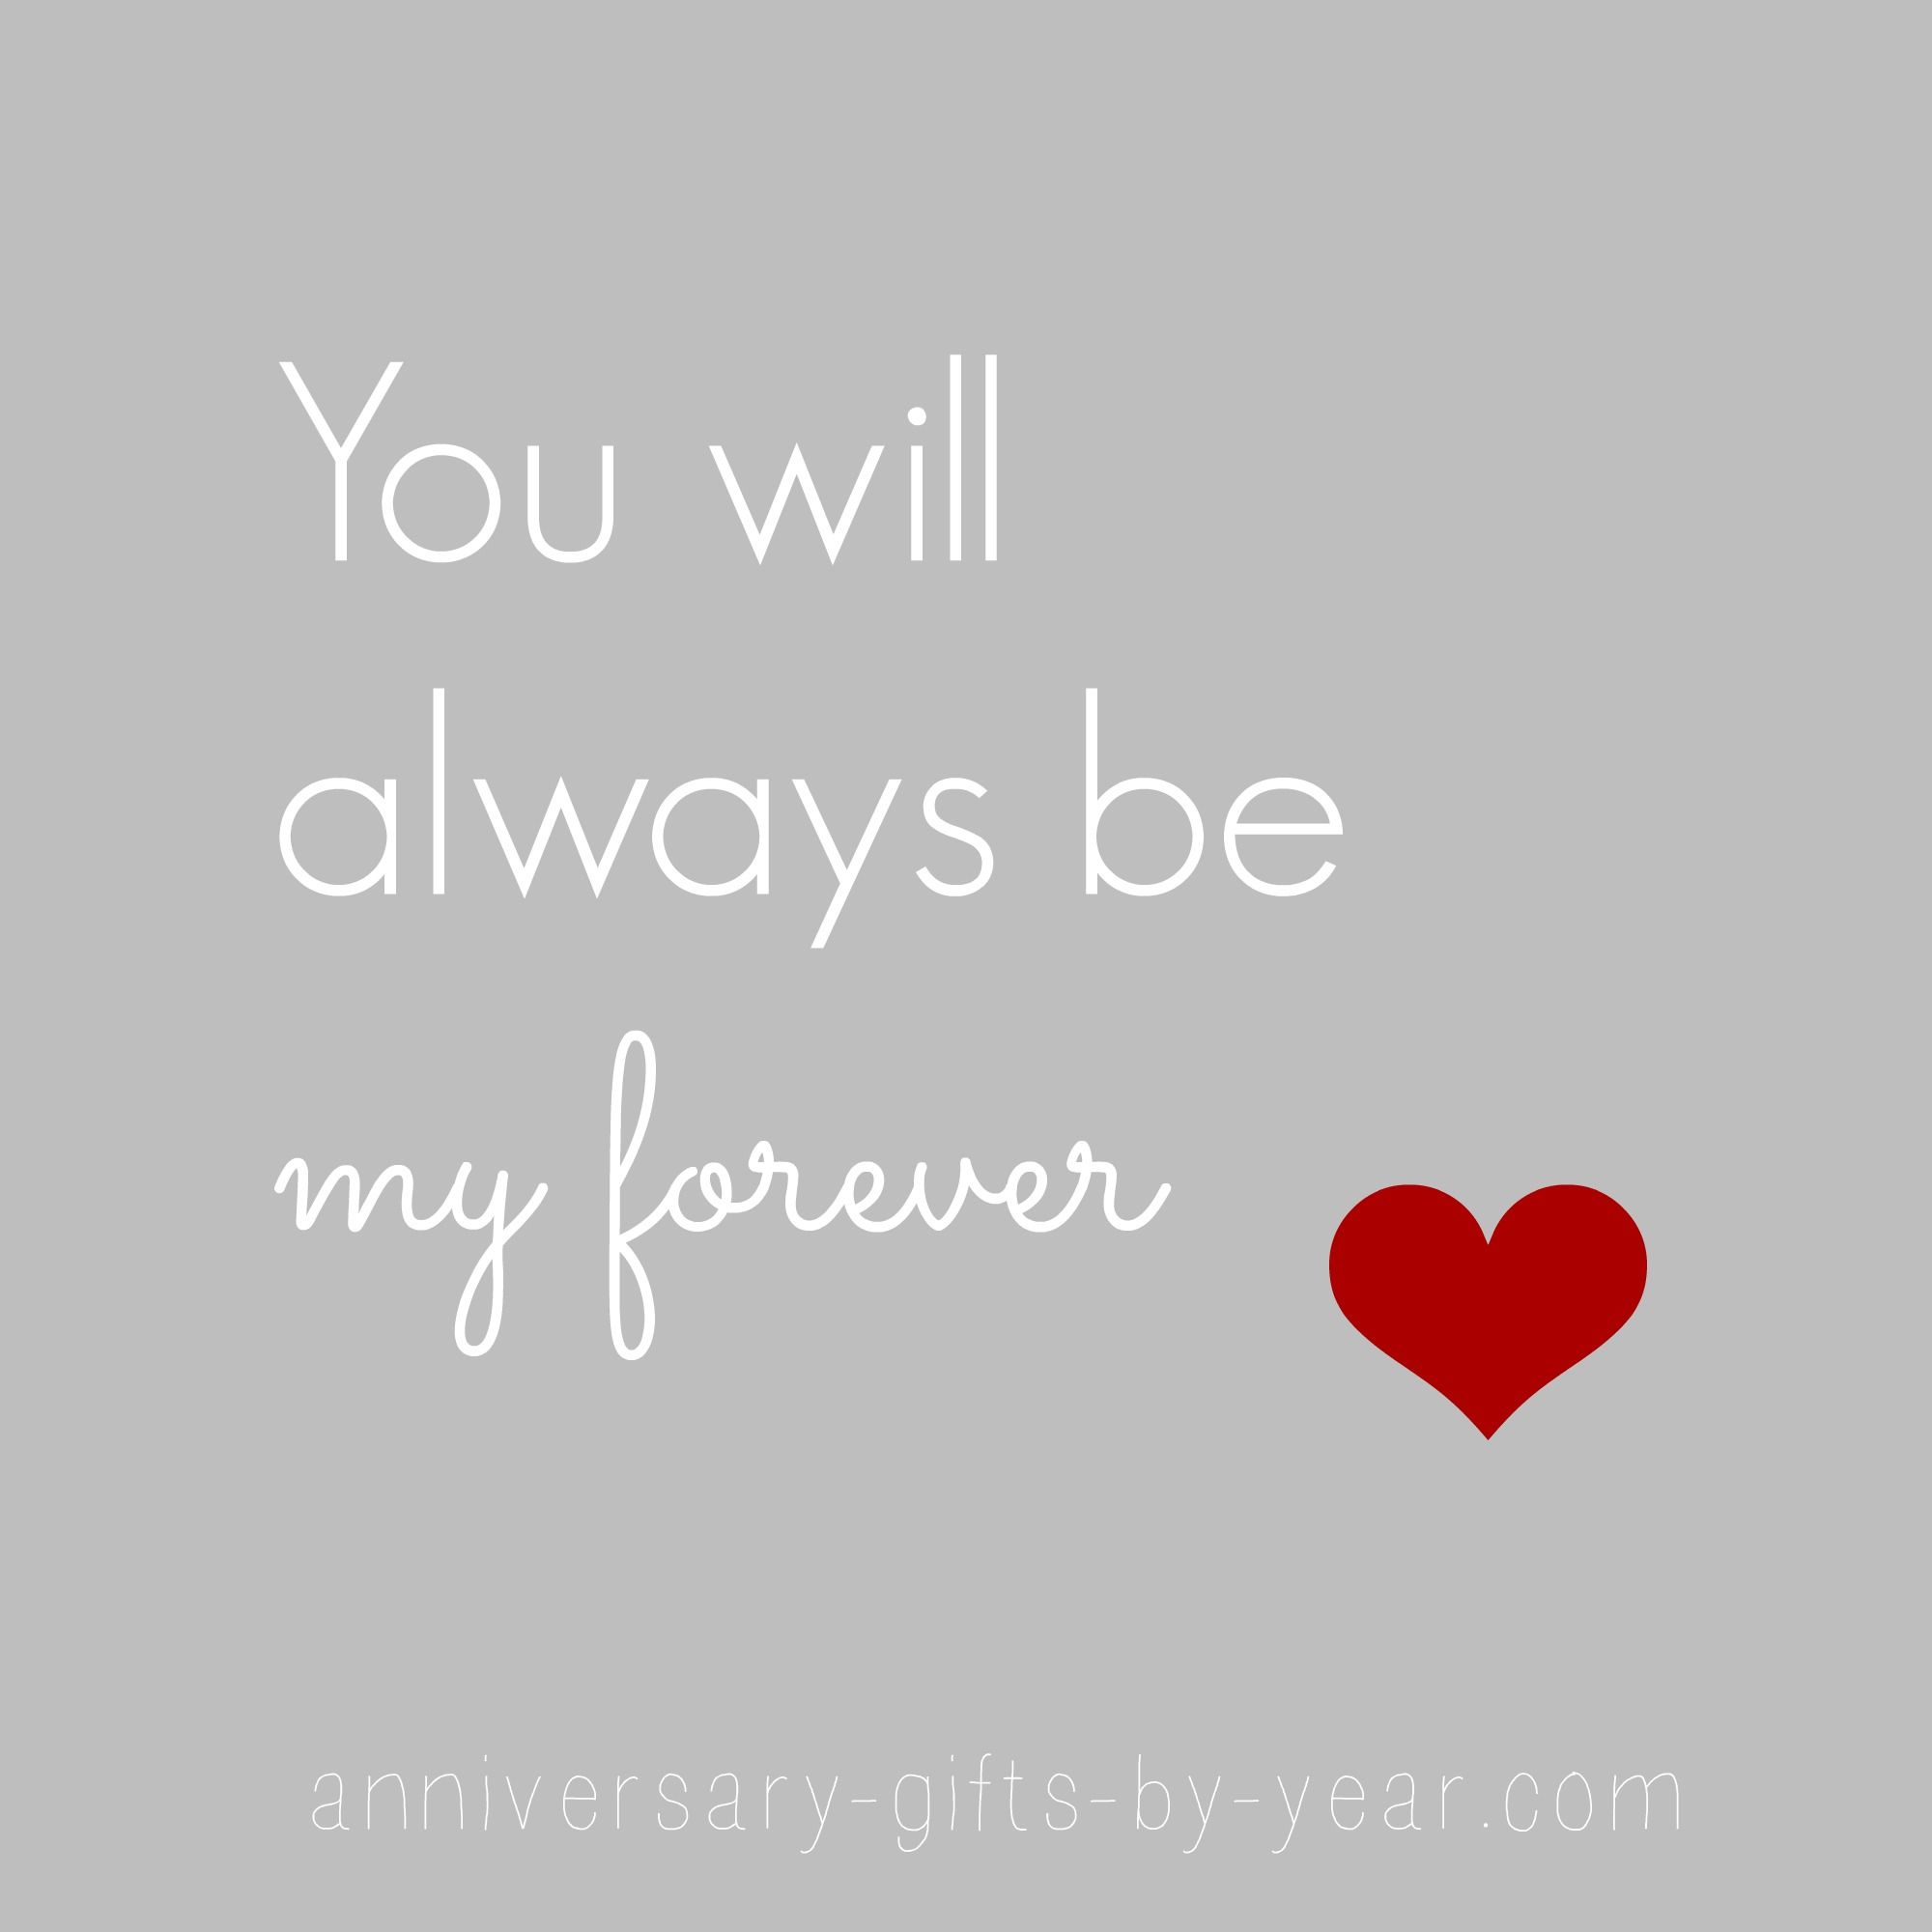 40 Lovely Anniversary Quotes and Sayings Collection